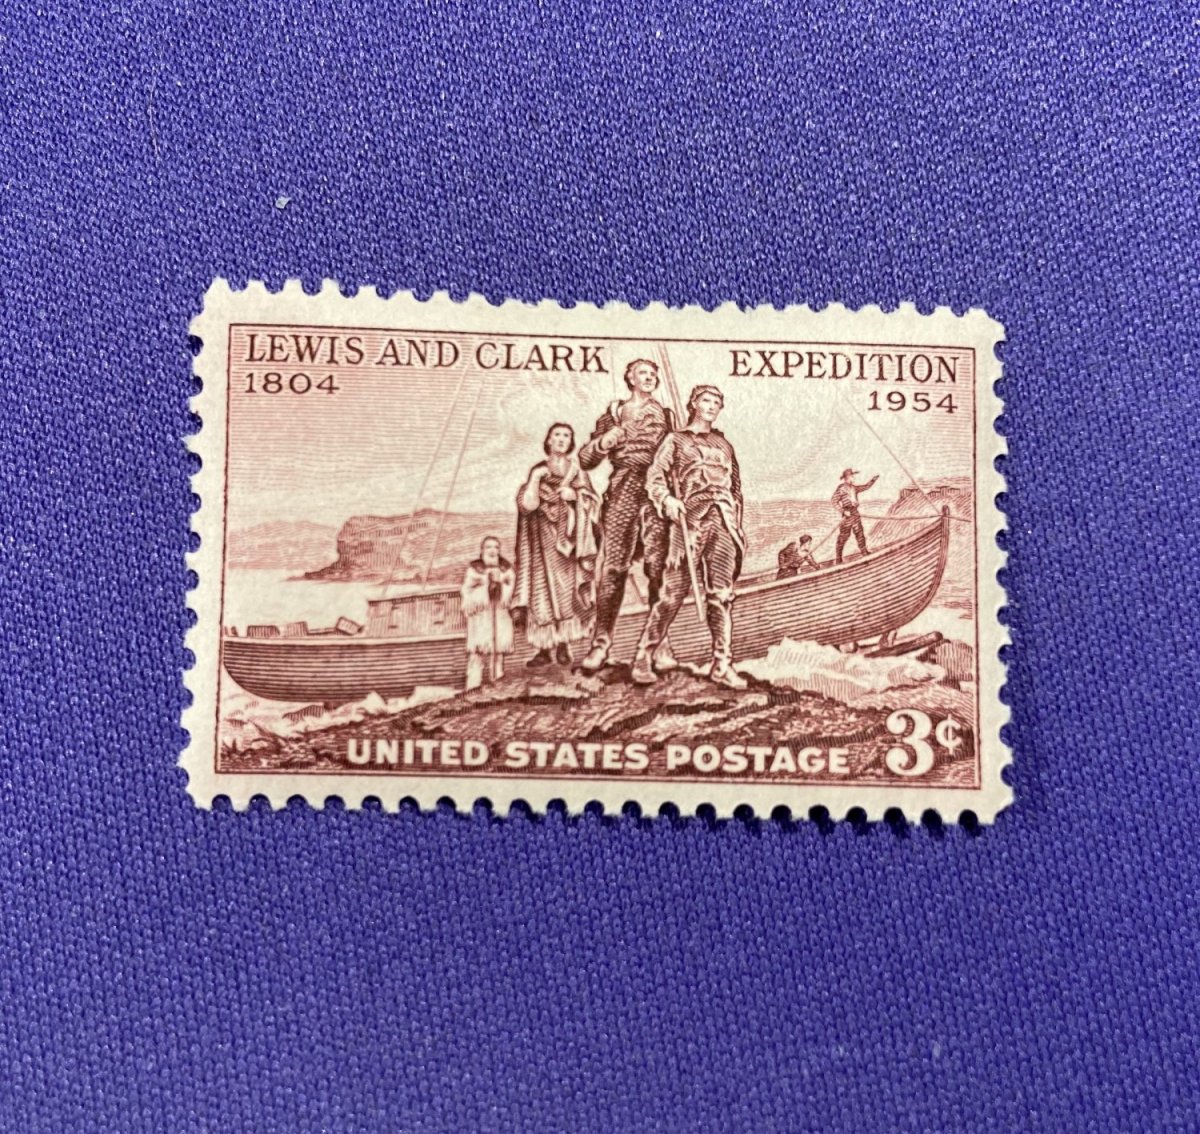 1295:: Stamps, U.S., violet brown, 3c, 1954, the Lewis and Clark  Expedition, Louisiana Purchase, uncirculated #1063 - Mark C. Grove